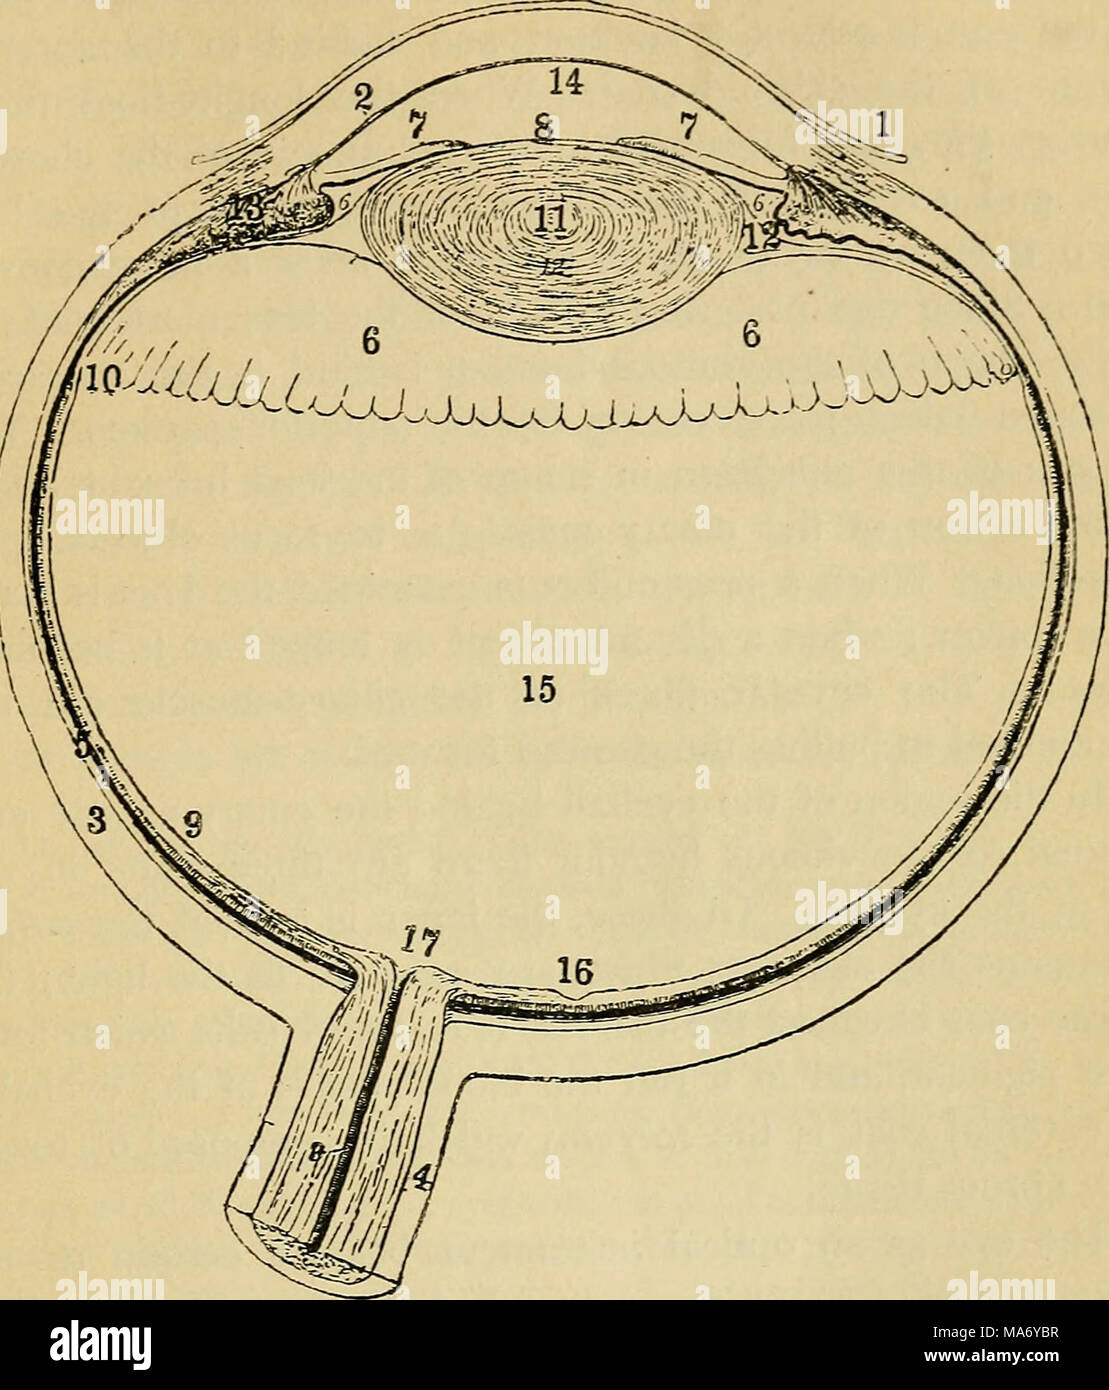 . Elementary physiology . Fig. 123.—View of the human ej'e, divided horizontally through the middle. I, conjunctiva; 2, cornea; 3, sclerotic; 4, sheath of the optic nerve; 5, choroid; 6, ciliary processes ; 7, iris; 8, pupil ; 9, retina ; 10, anterior limit of the retina ; II, crj'stalline lens ; 12, suspensory ligament ; 13, ciliary muscle ; 14, anterior chamber; 15, posterior chamber ; i6, yellow spot; 17, blind spot. is completely filled by a clear jelly-like mass called the vitreous humour. The iris lies in the anterior chamber in front of the lens, and its variable central apertm-e (the p Stock Photo